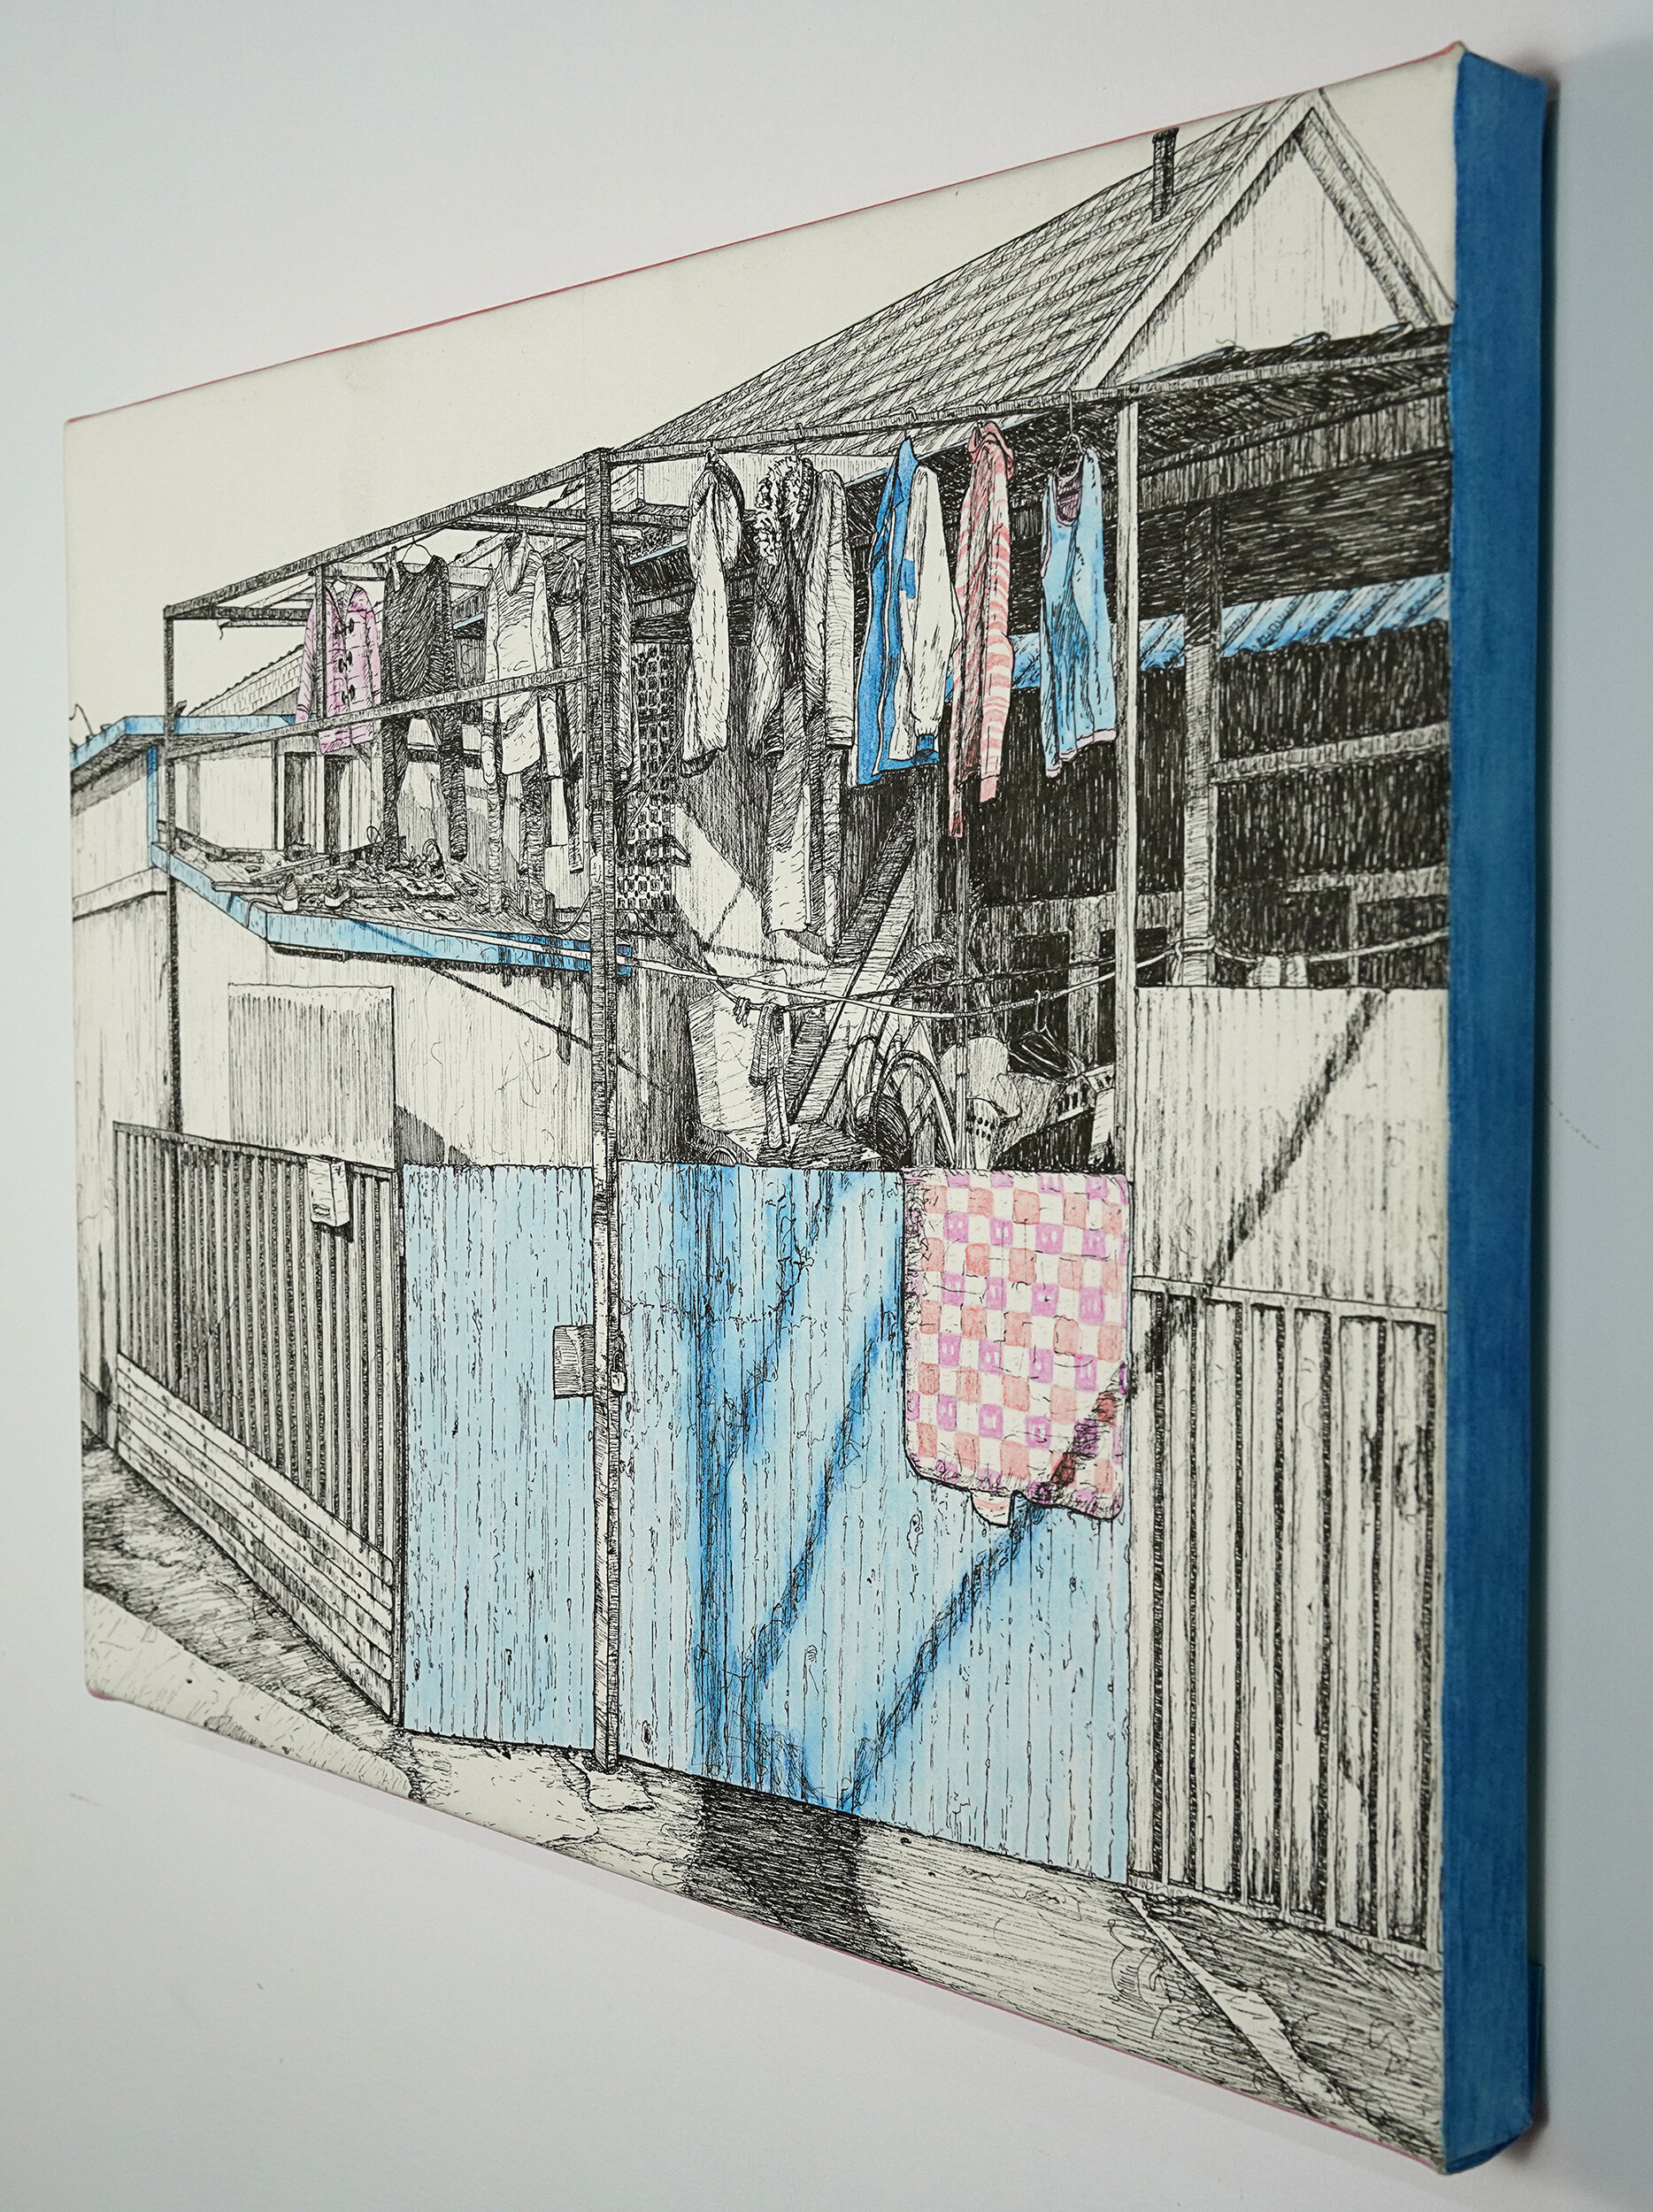   Drying Clothes  (side view), 2020, ink and watercolor pencil on paper, 30 x 40 cm 